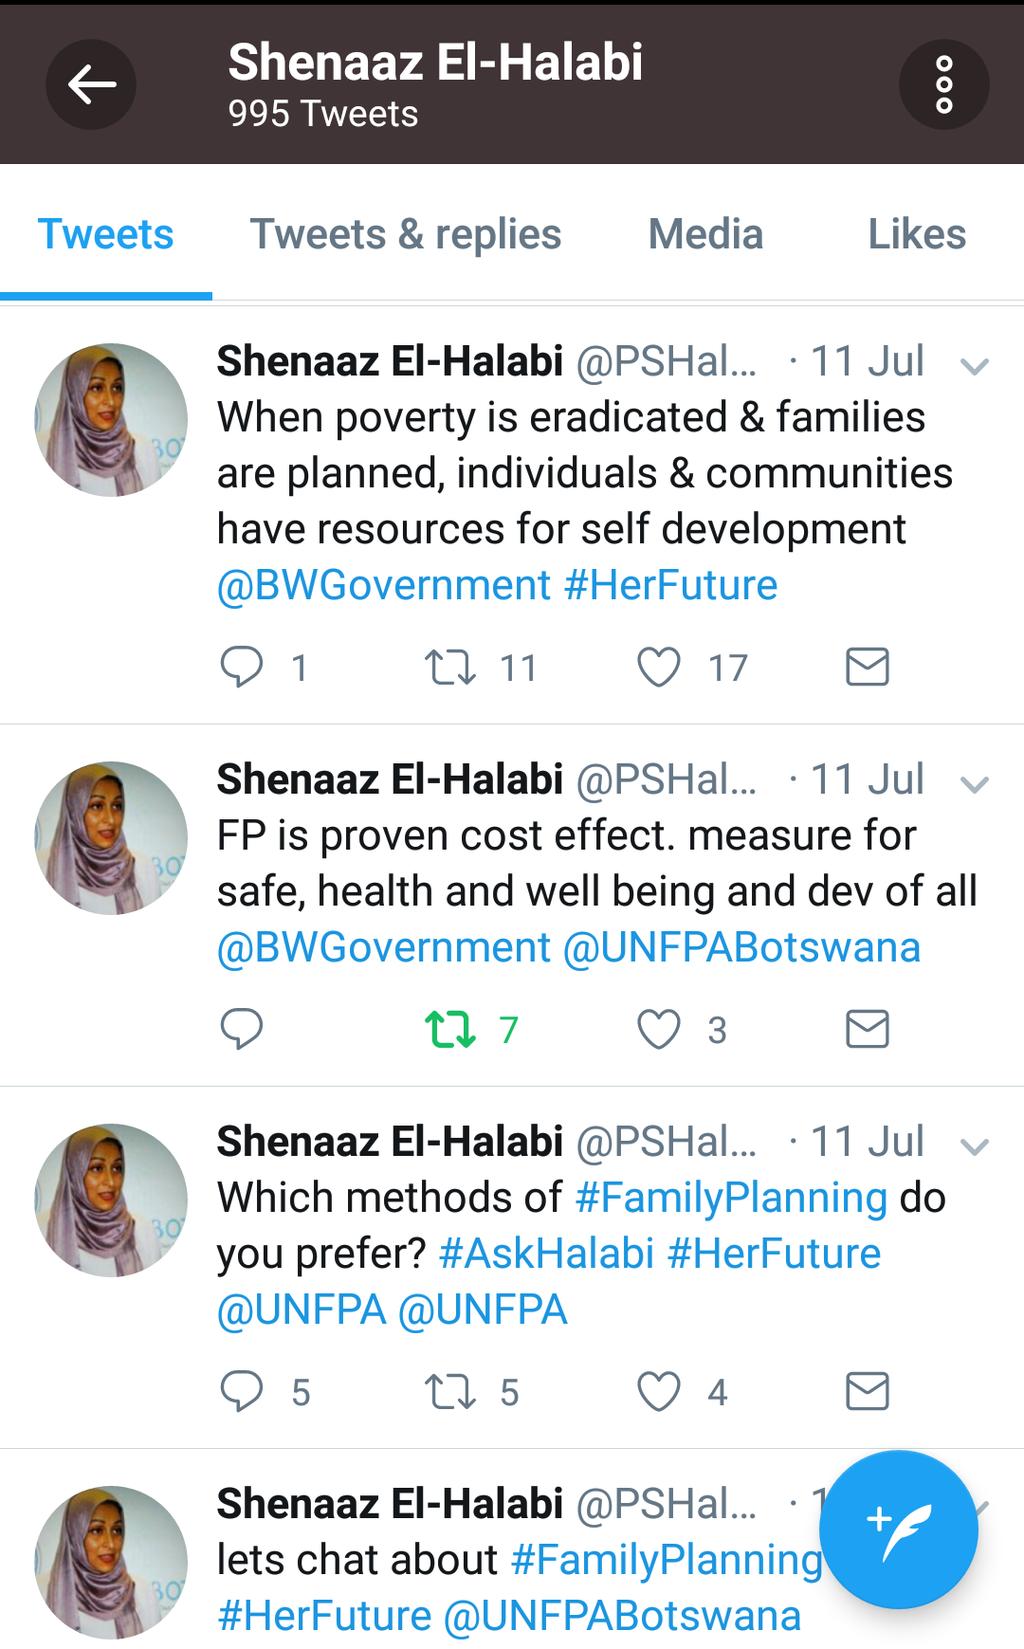 Ms El-Halabi appreciated the Twitter family planning in Botswana. chat as an important platform for her and other Senior government officials to be in touch with young people s views.